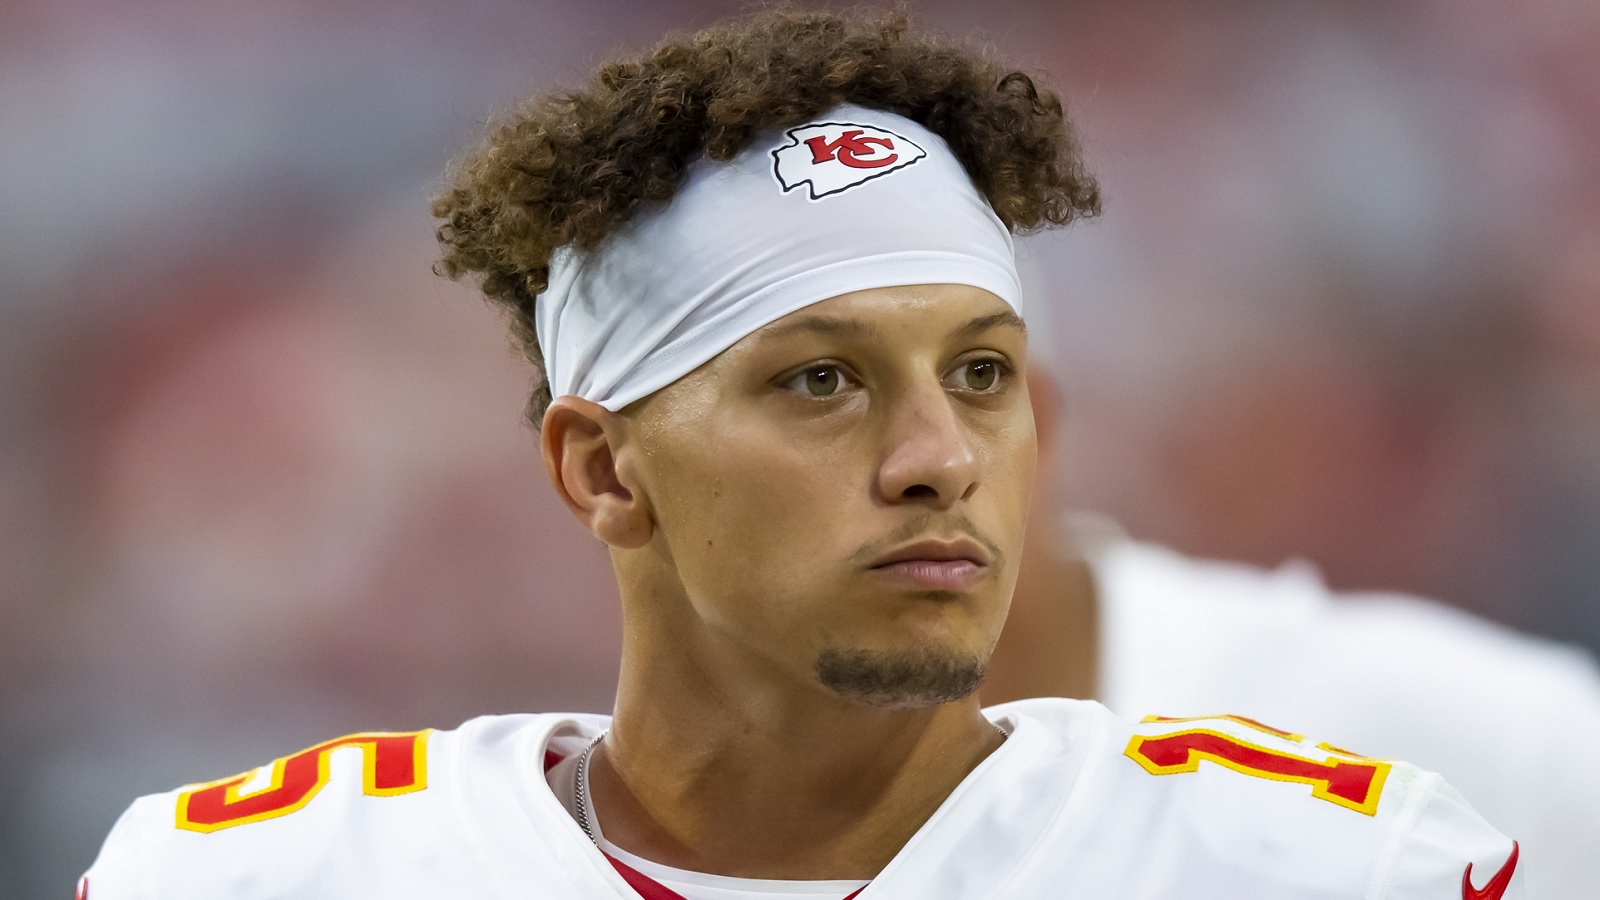 Patrick Mahomes has great quote about his contract situation